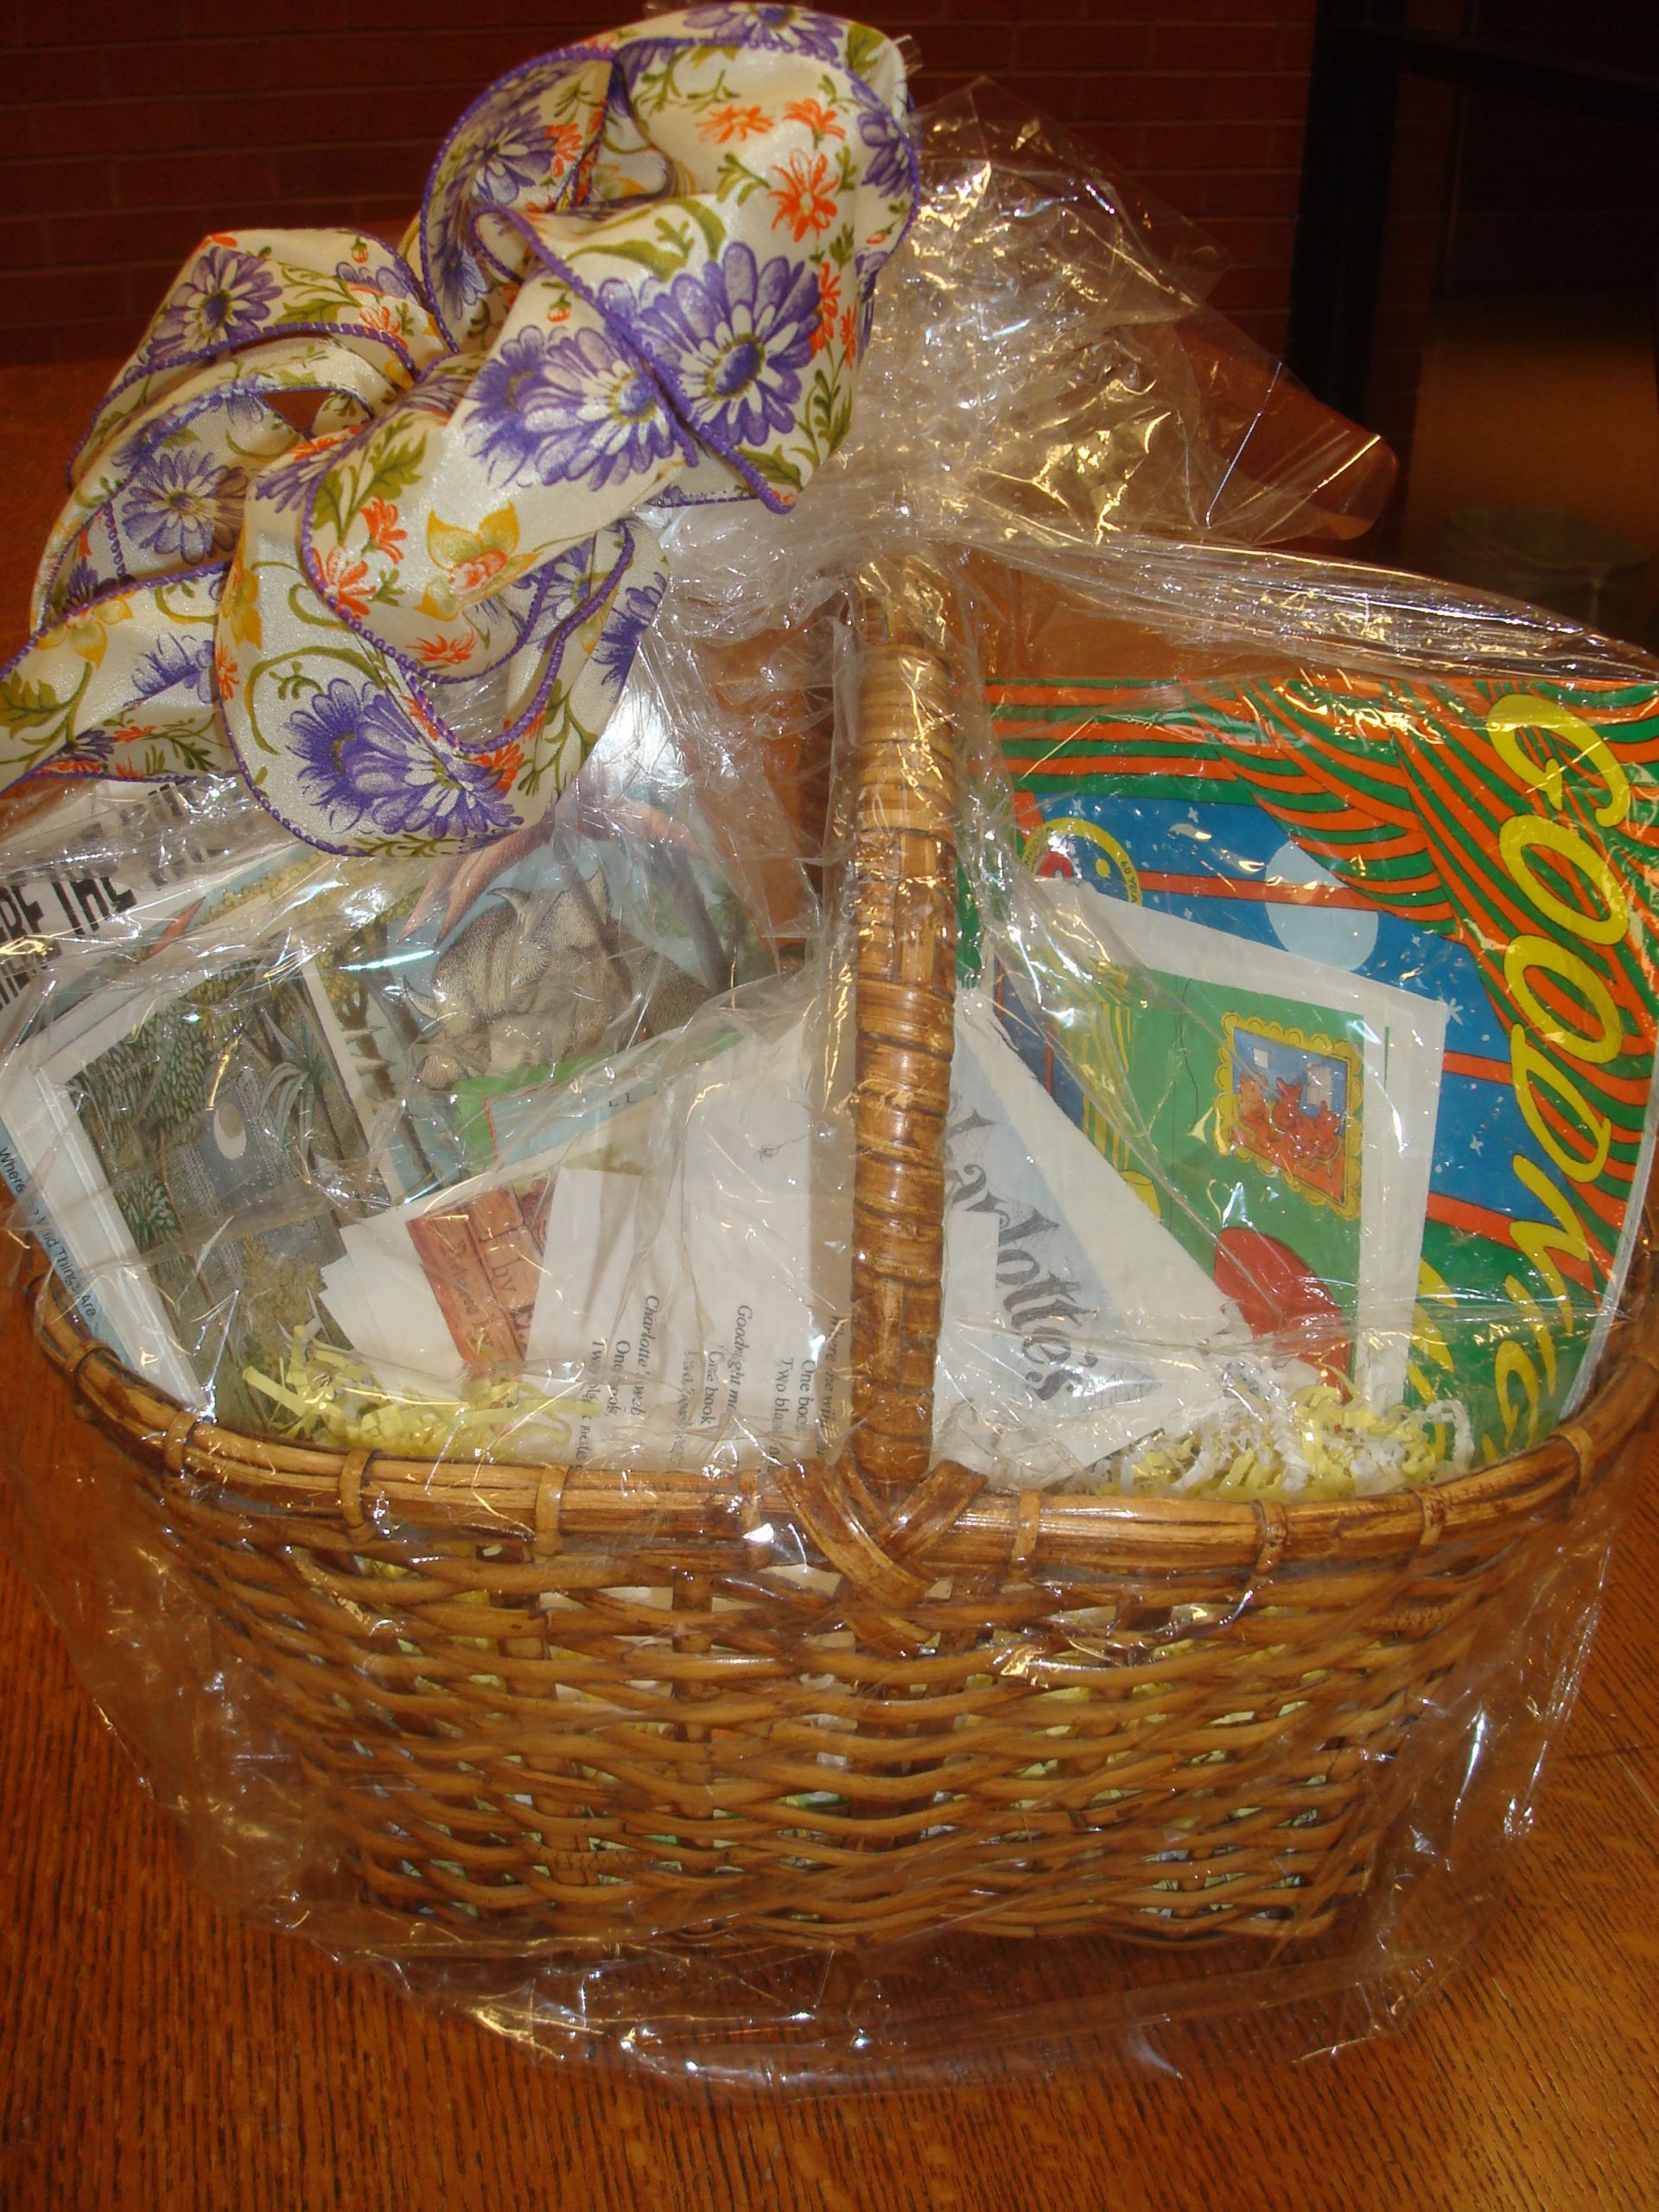 Gift Basket Fundraising Ideas
 Themed Gift Basket Ideas For Fundraising